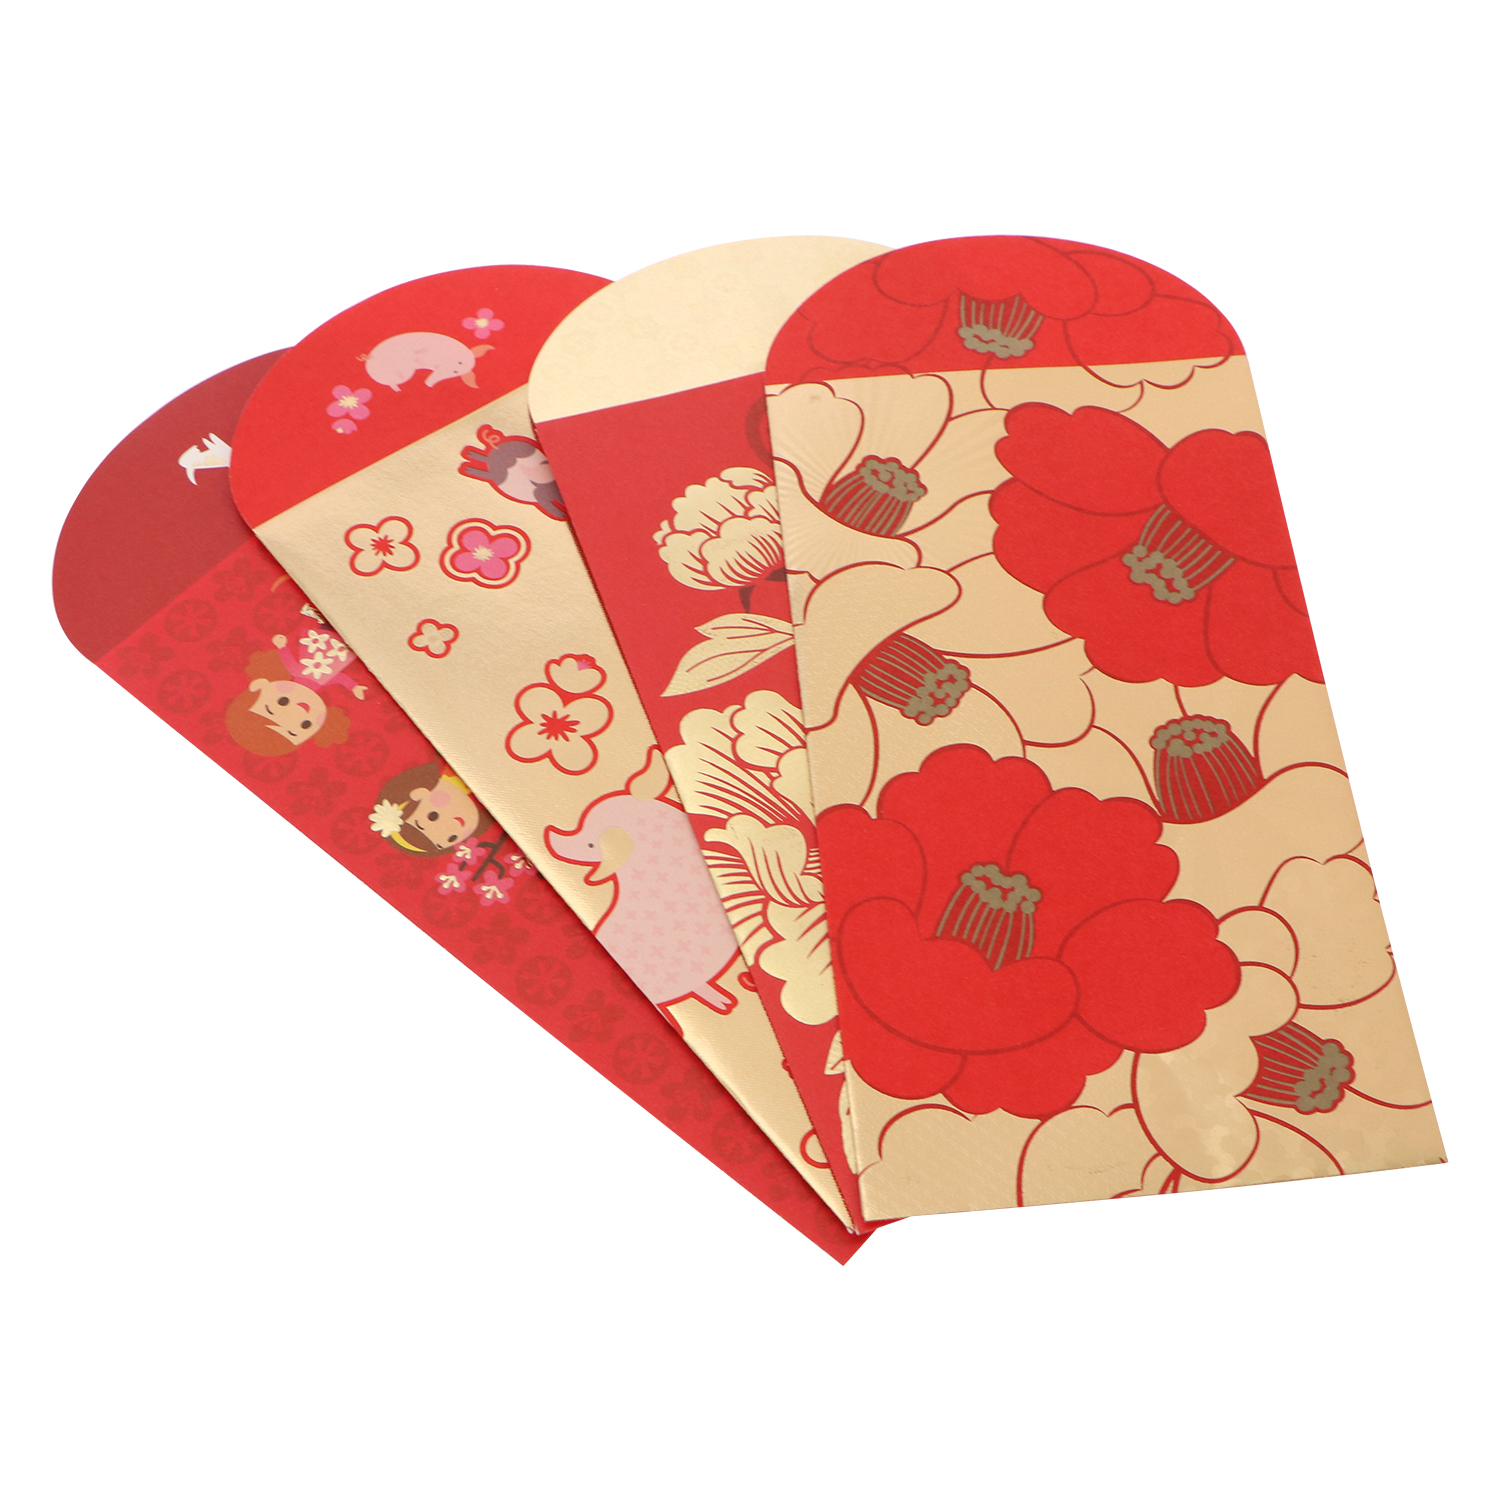 Custom Red Pocket Corporate Gift for Chinese New Year 